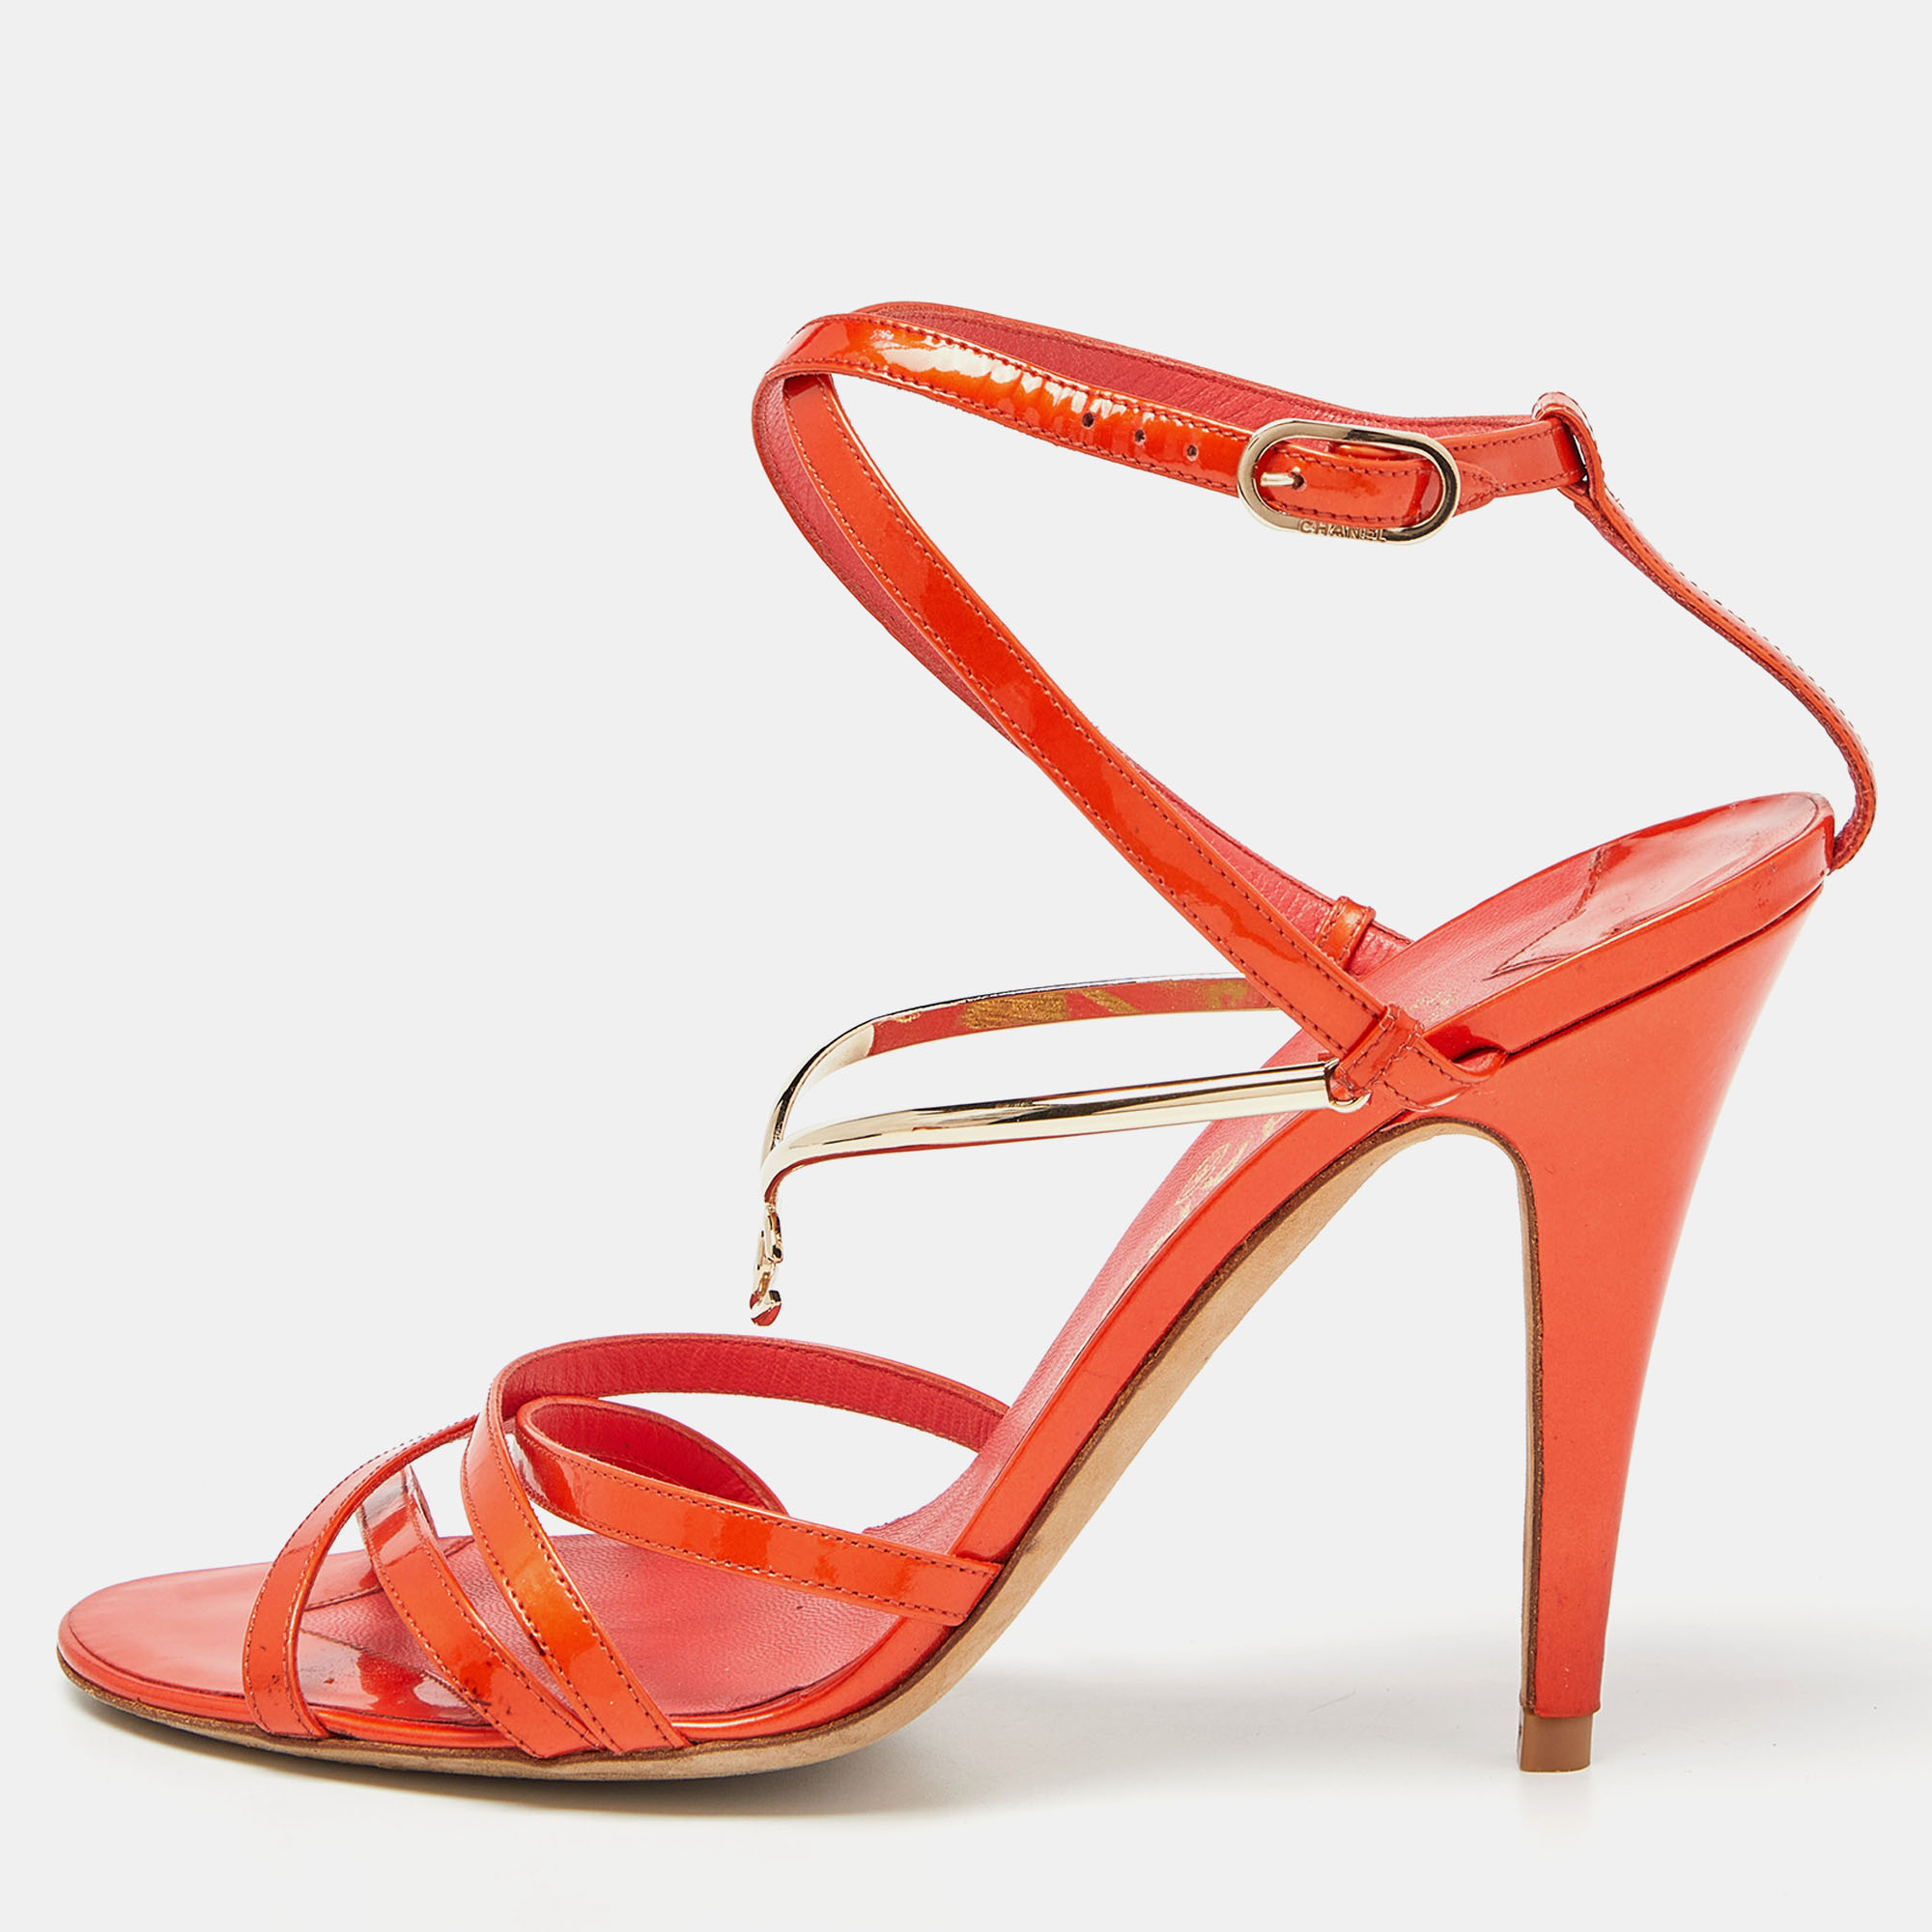 Pre-owned Chanel Orange Patent Ankle Strap Sandals Size 39.5